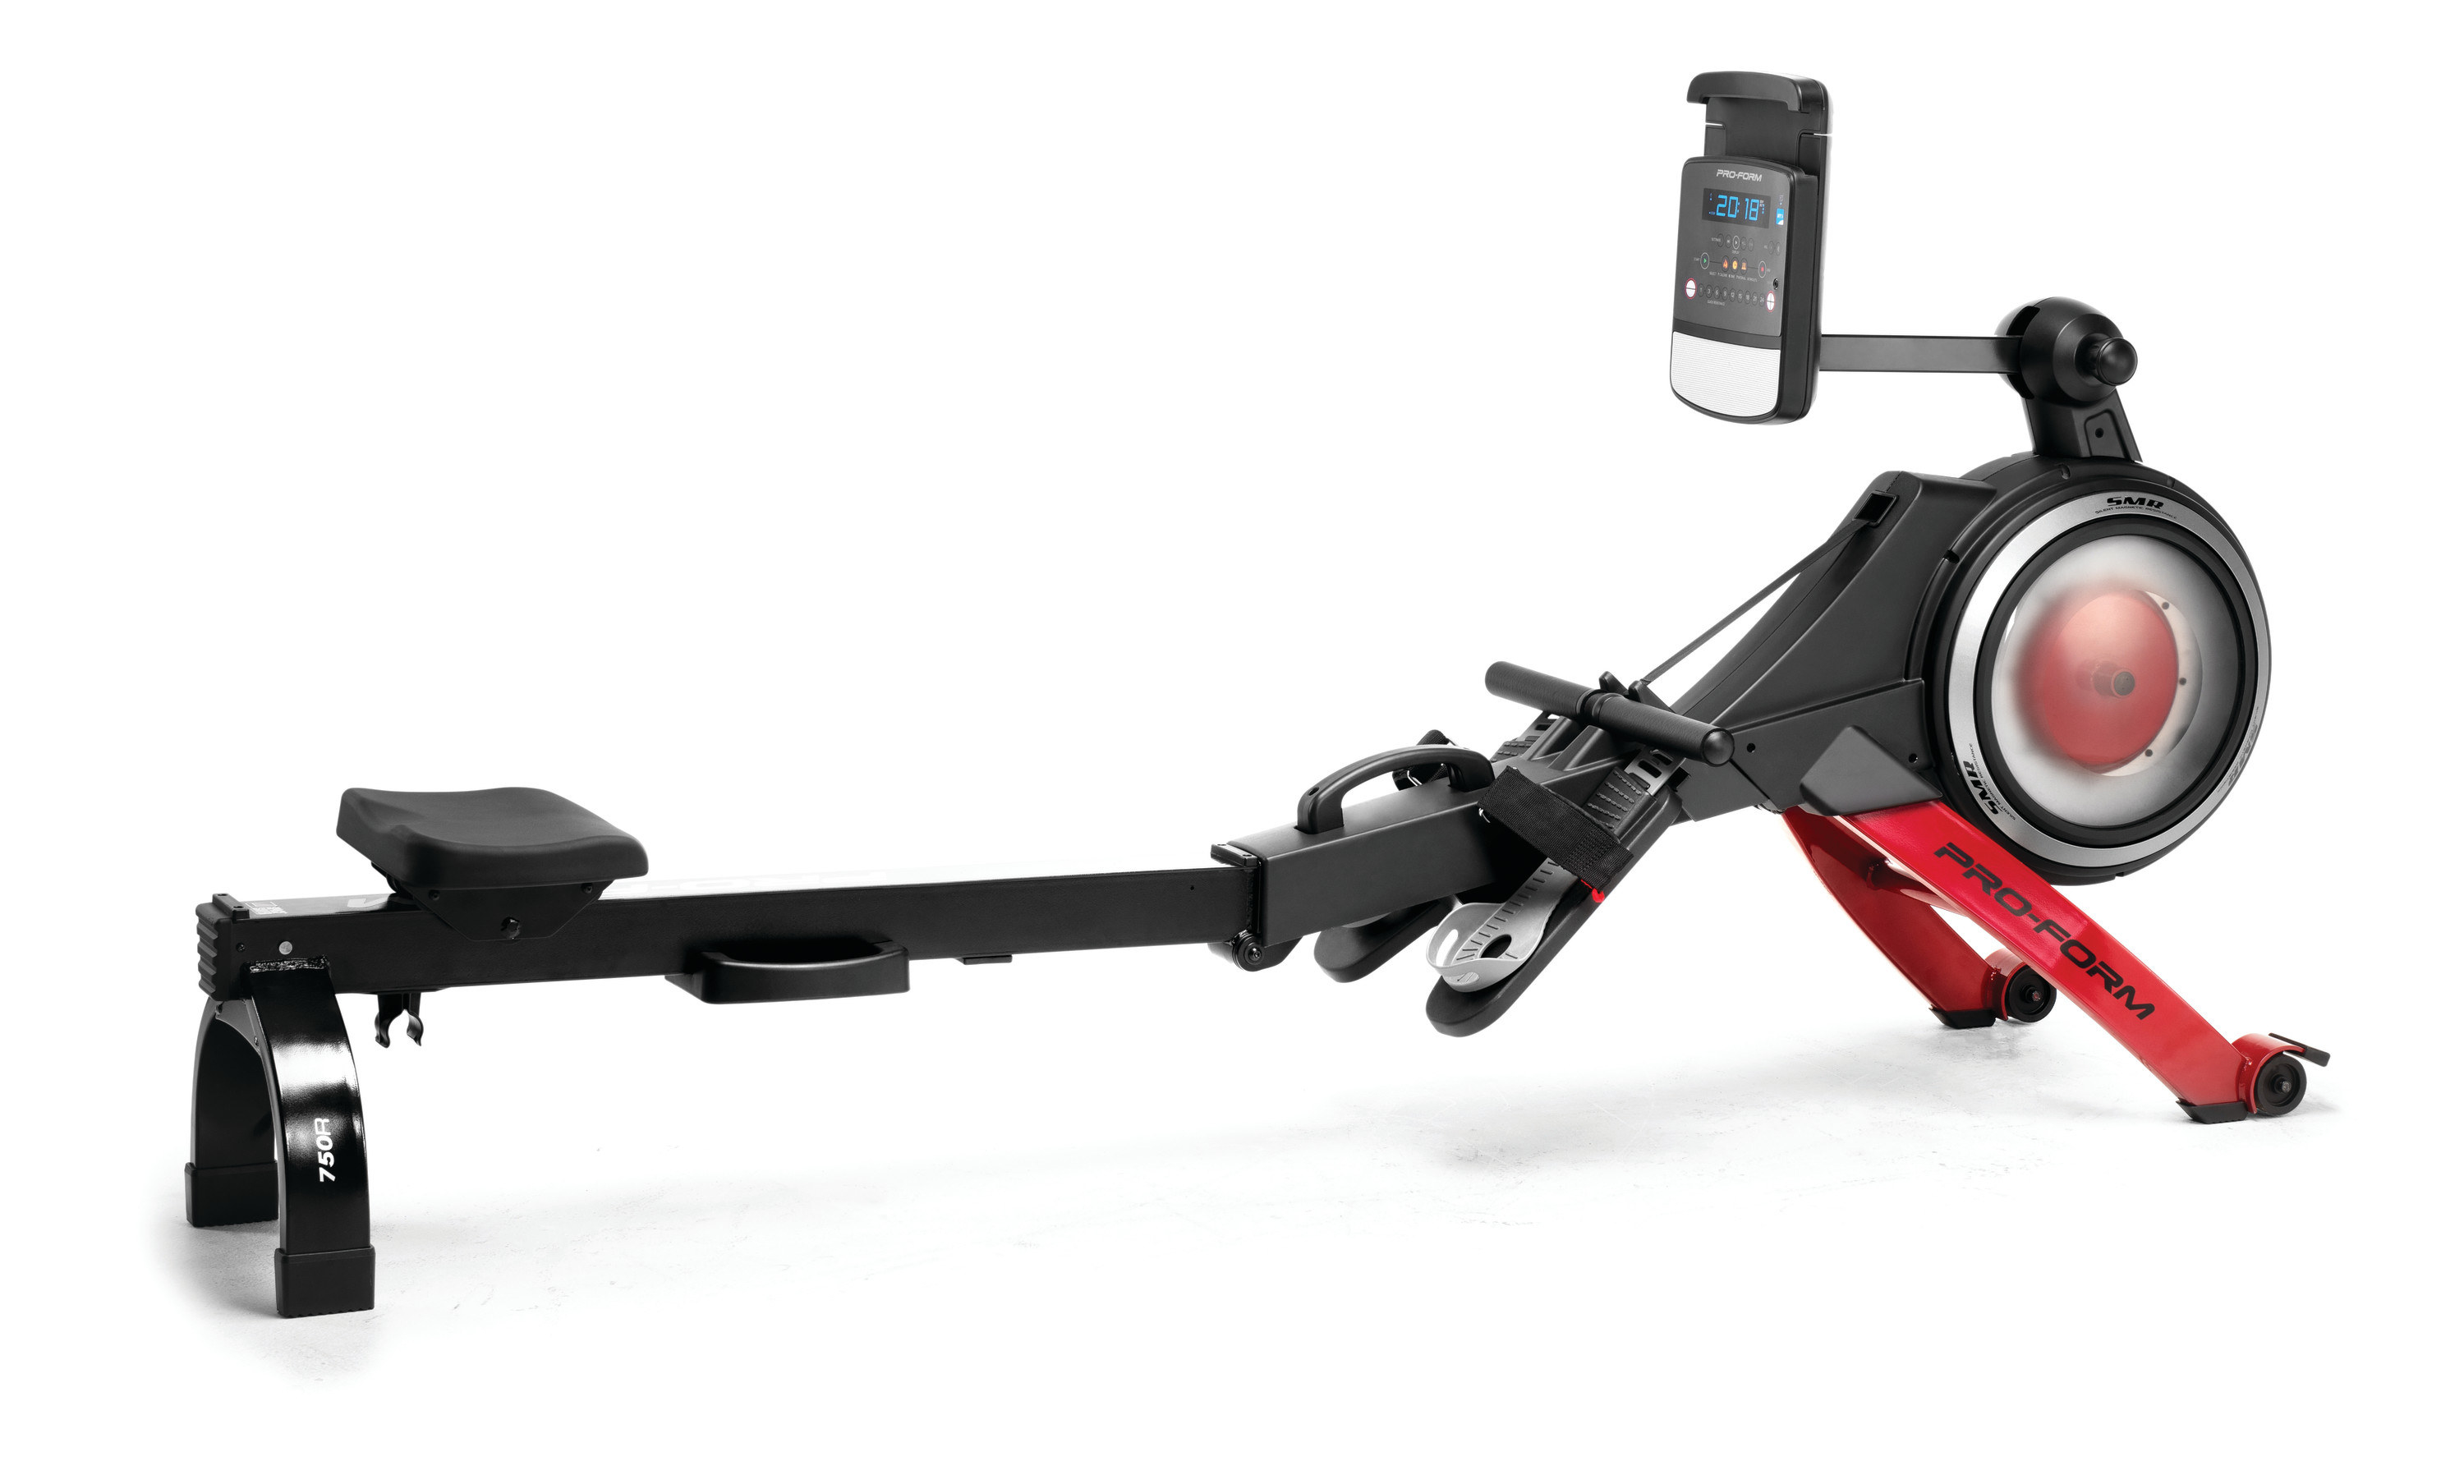 Product image of black and red rowing machine against white background